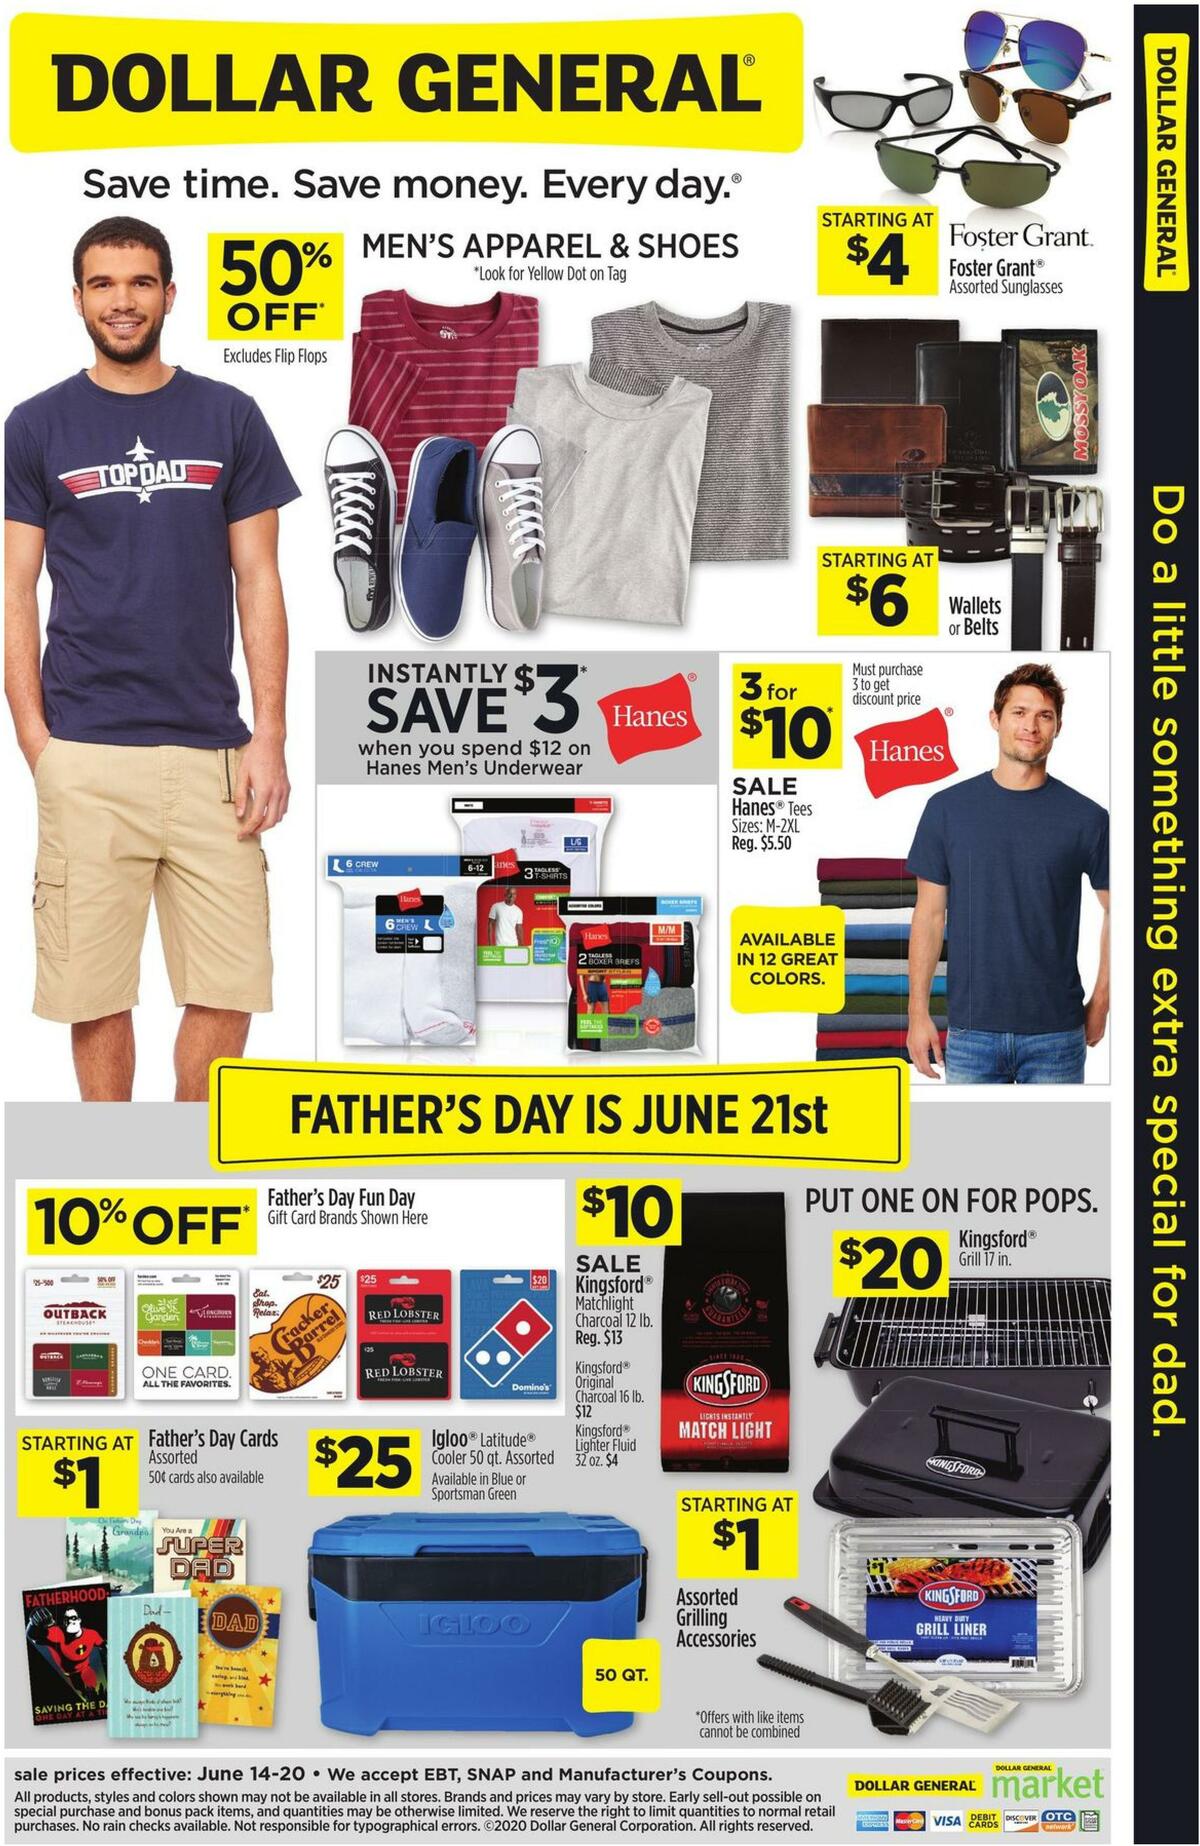 Dollar General Do something extra special for dad Weekly Ad from June 14